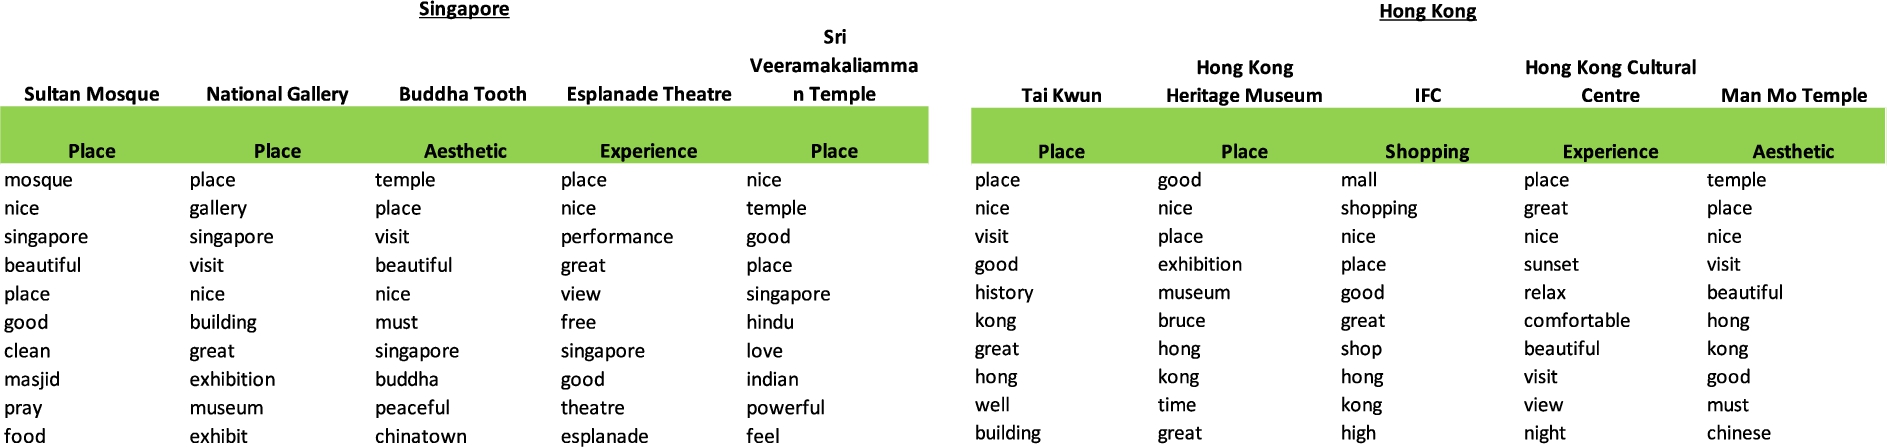 Top 5 Art Places for each city, topic and keywords.